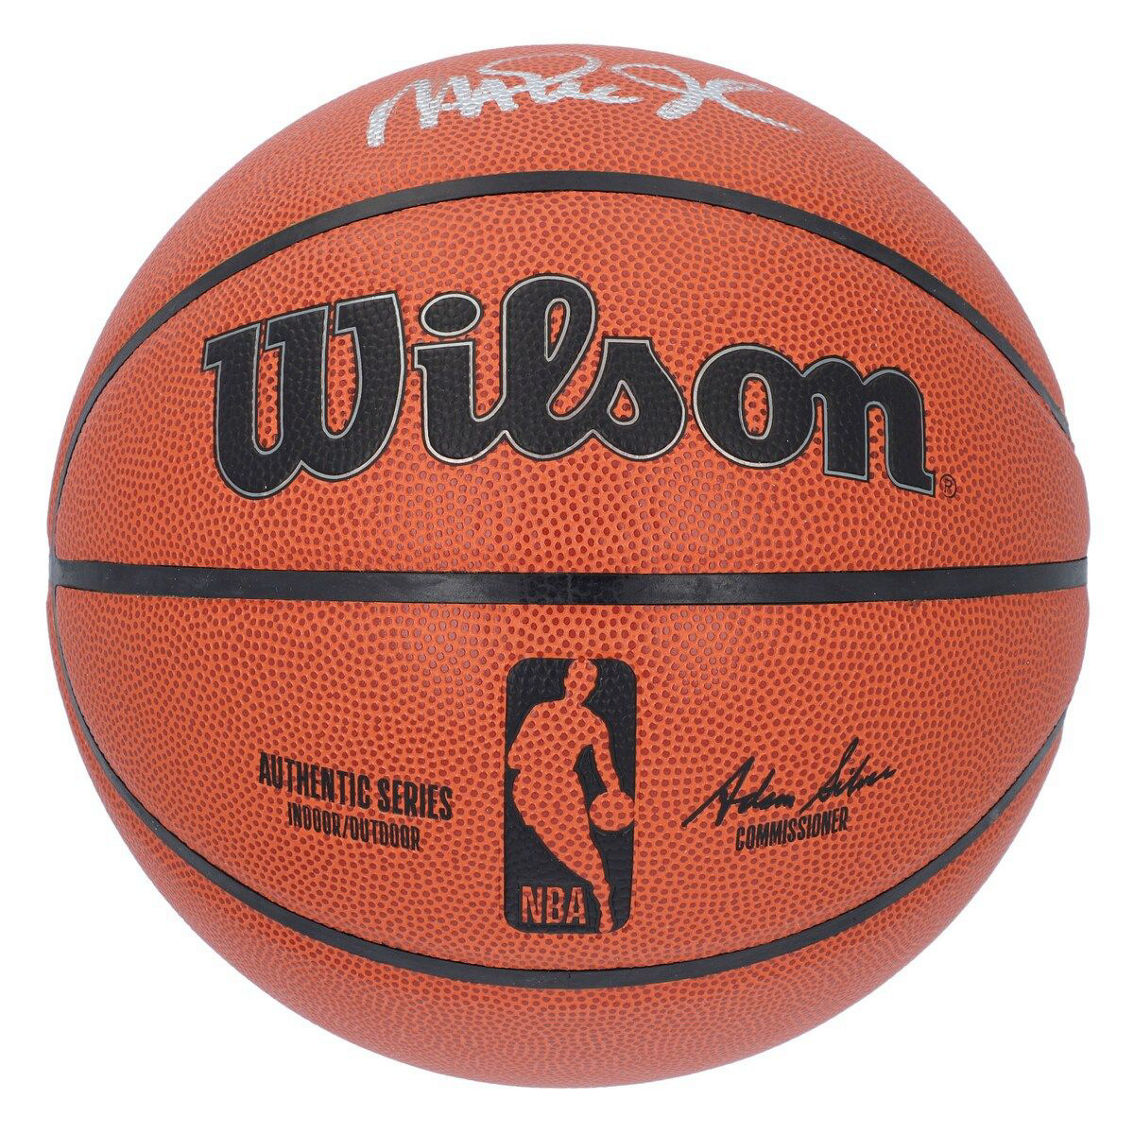 Fanatics Authentic Magic Johnson Los Angeles Lakers Autographed Wilson Authentic Series Indoor/Outdoor Basketball - Image 3 of 3